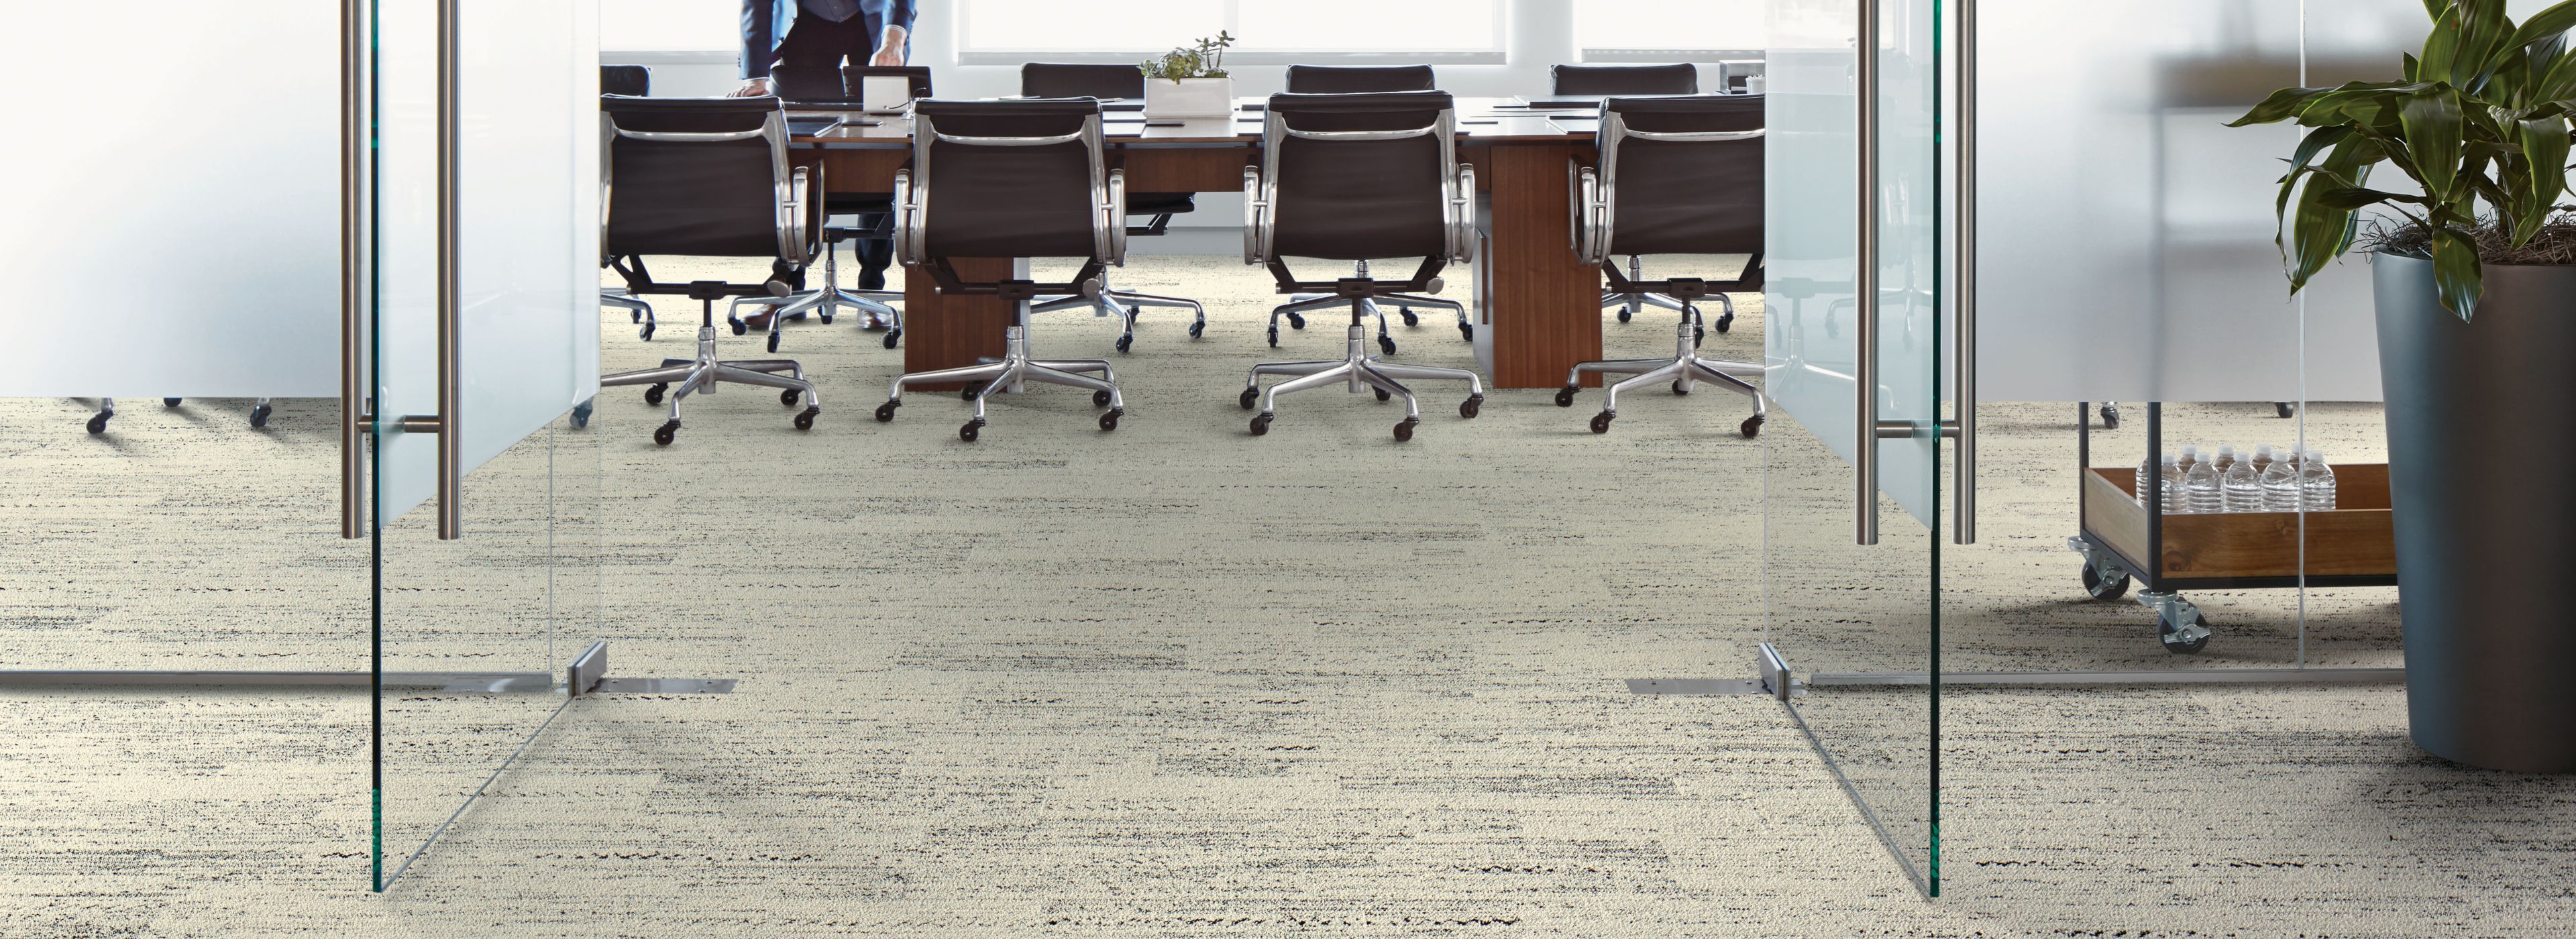 Interface Darning plank carpet tile in meeting area with man leaning over table image number 1